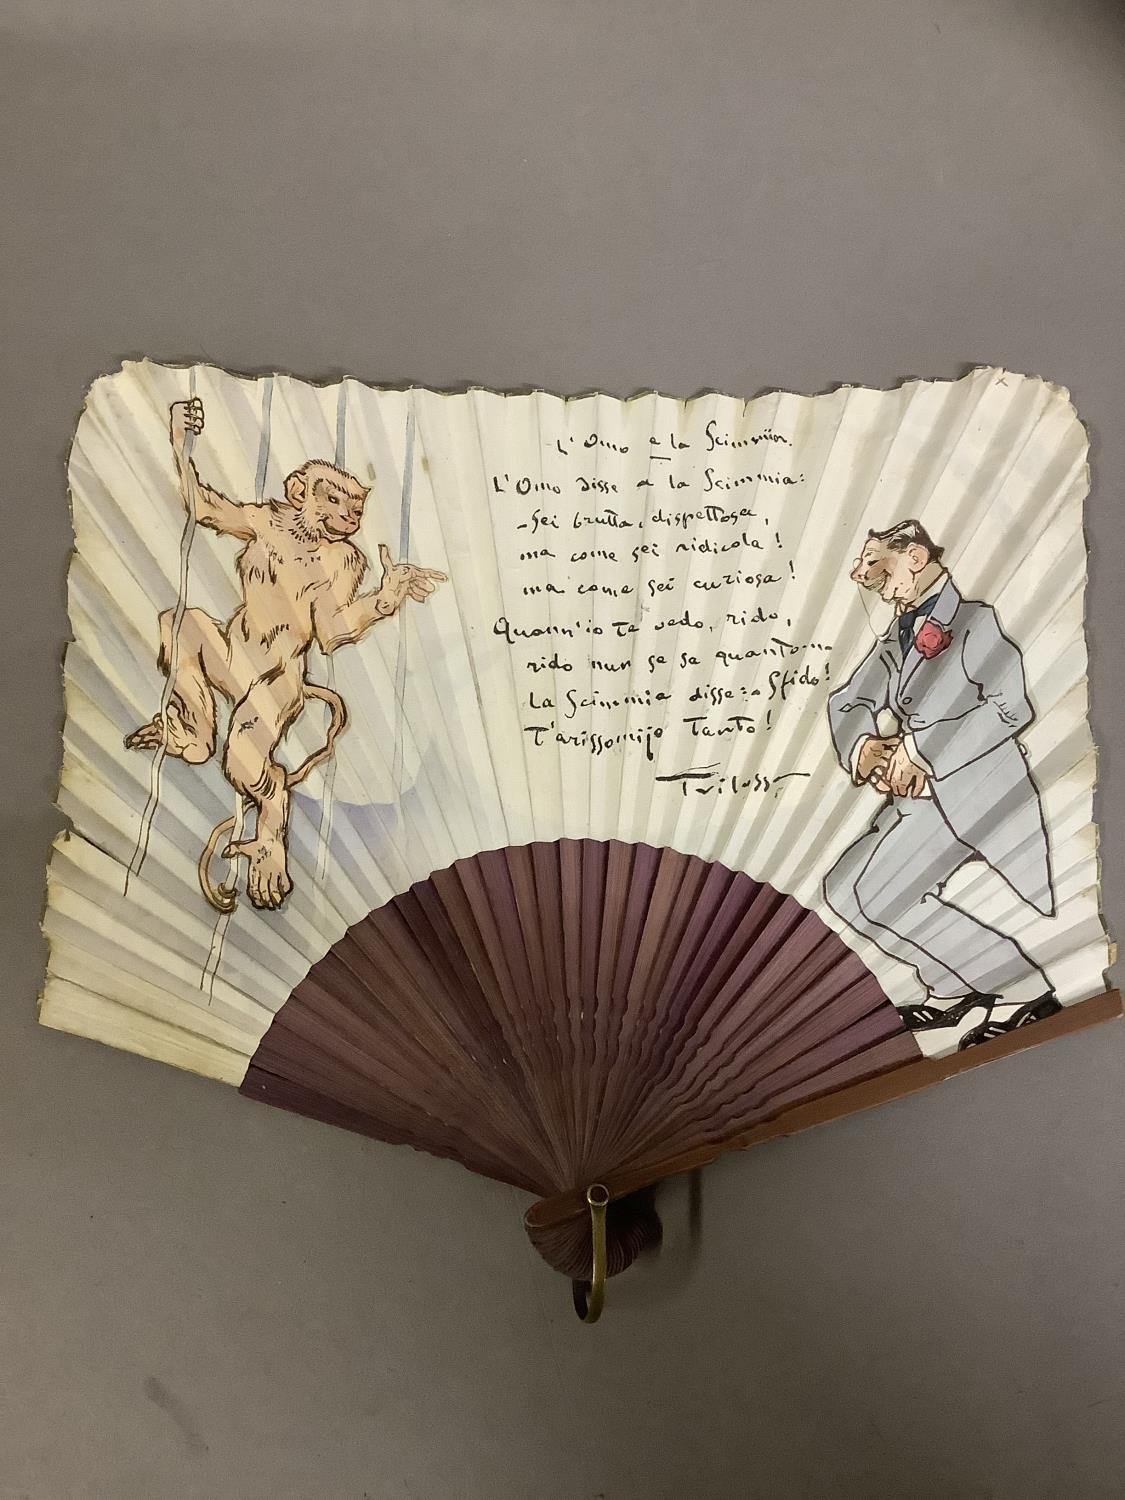 A “Mouchoir” fan, an example of the scarce fans with leaf shaped as a square, like a handkerchief,